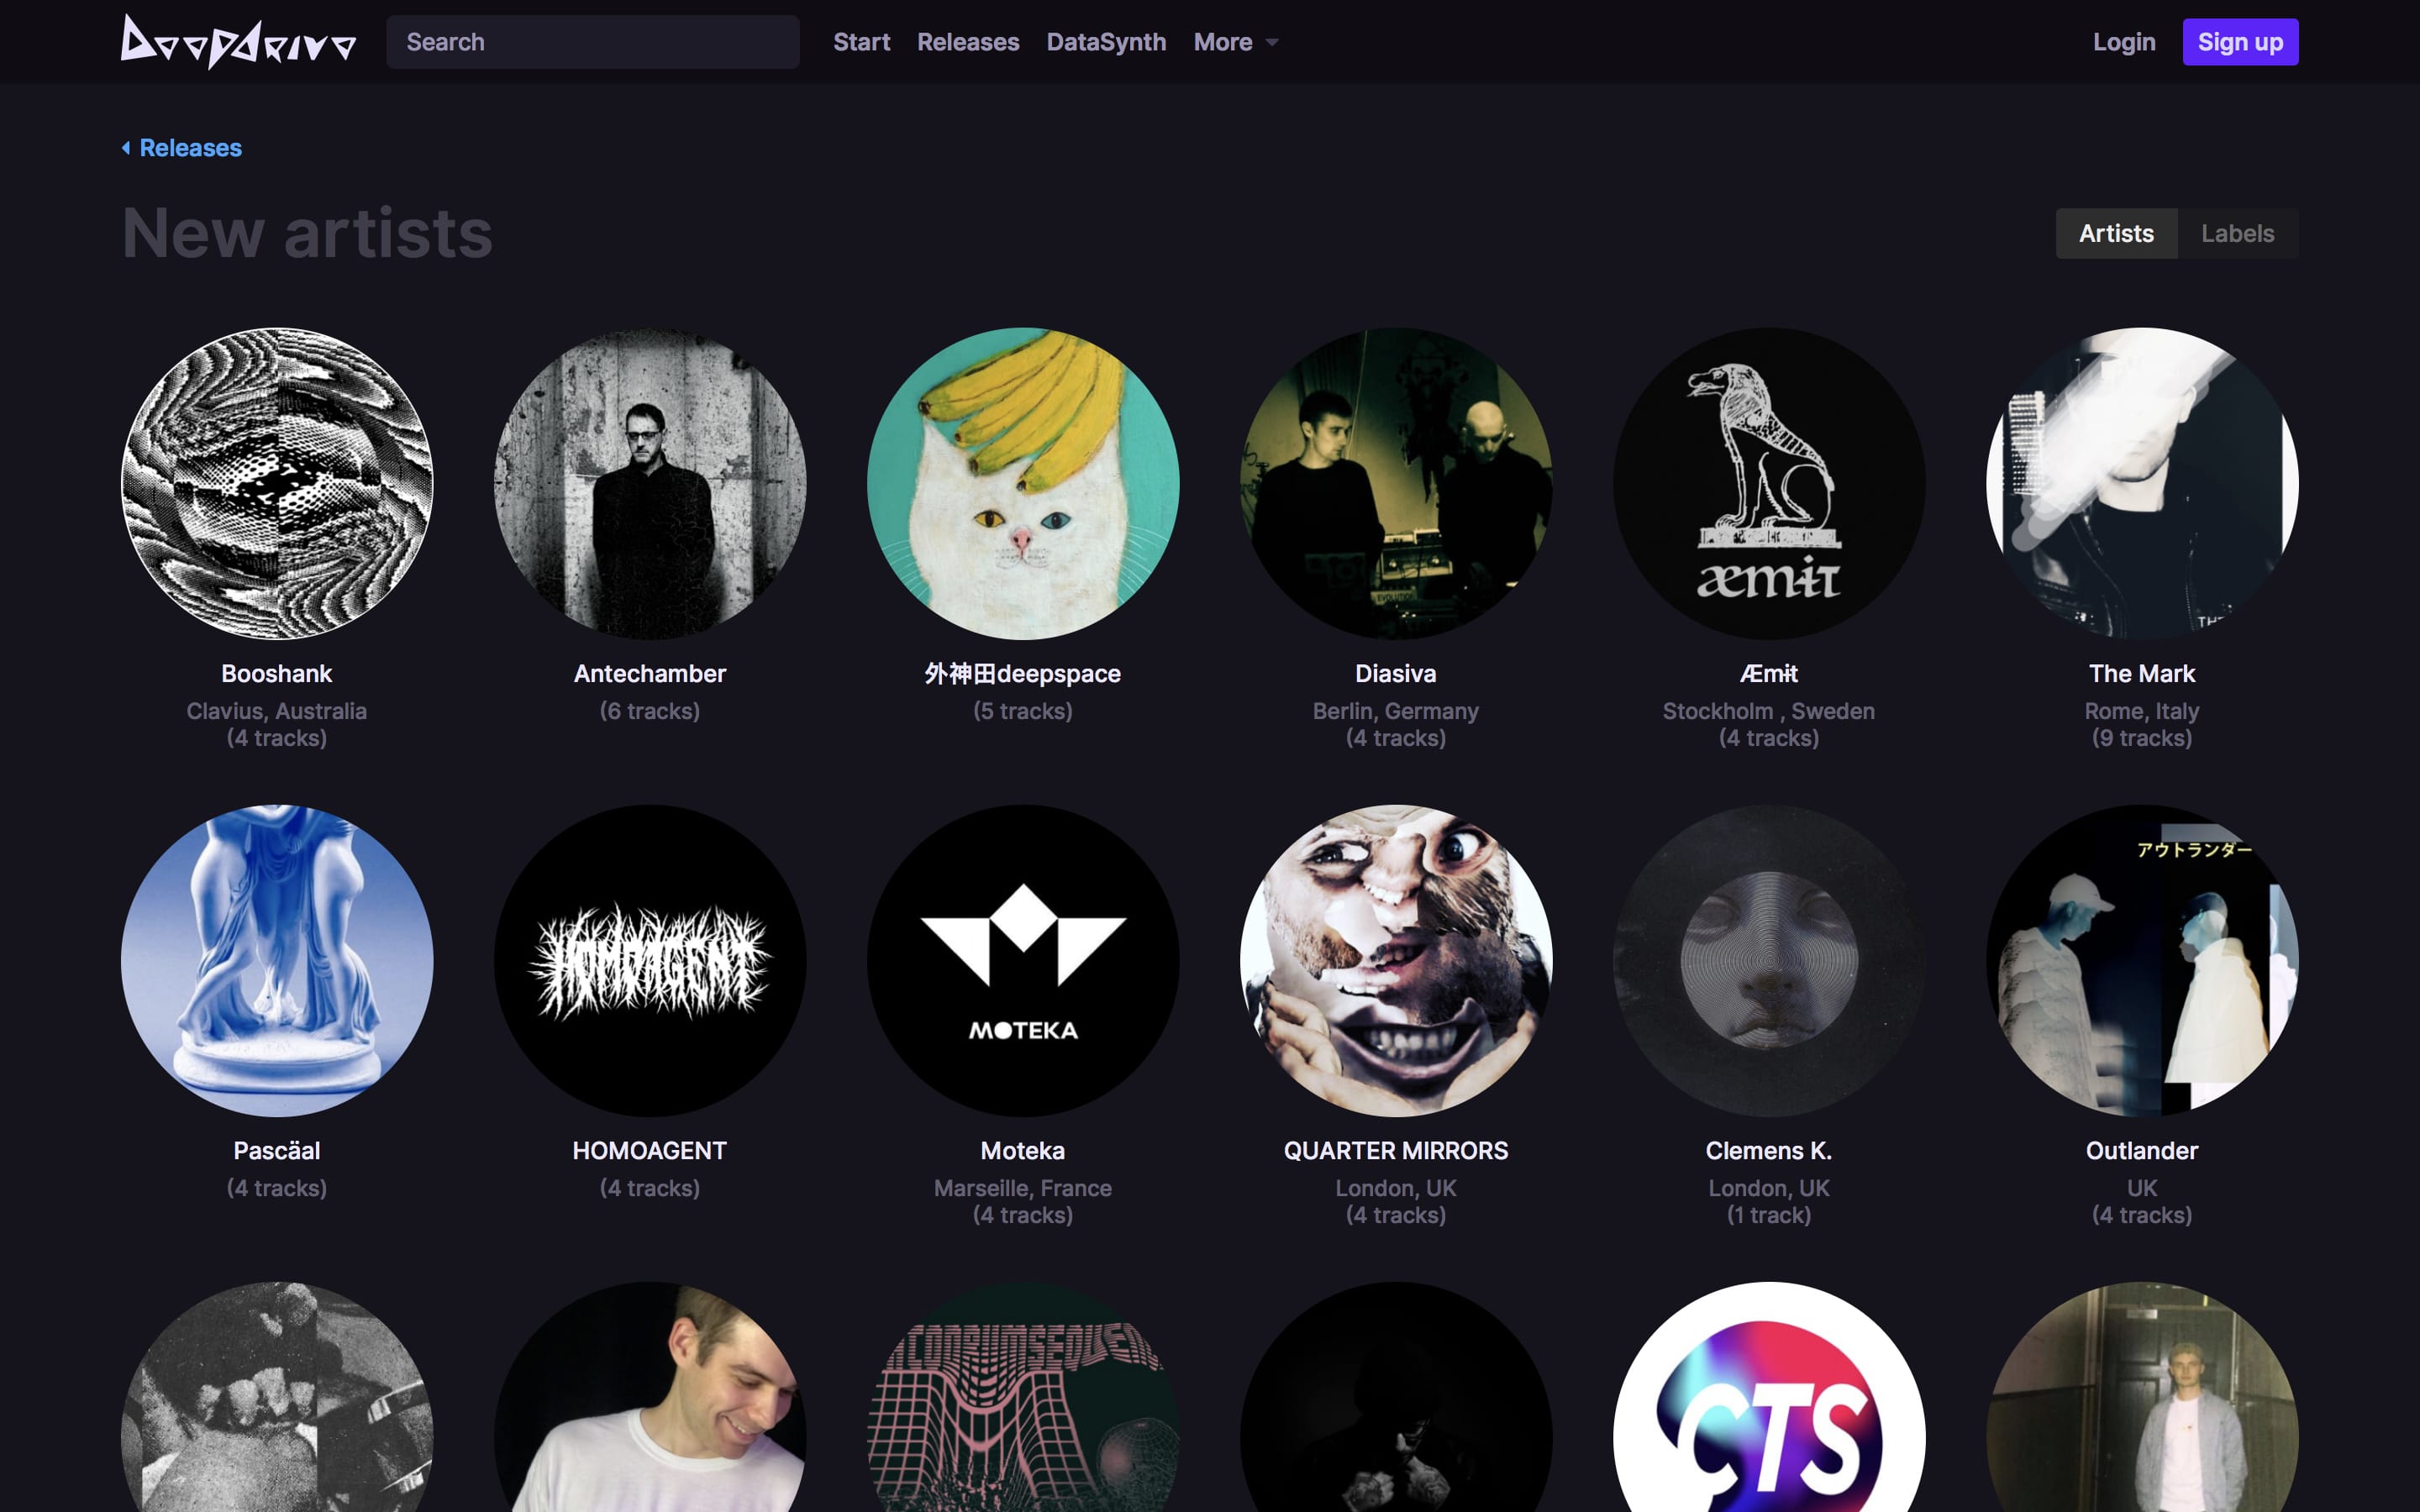 Screenshot of the new artists page on Deepdrive